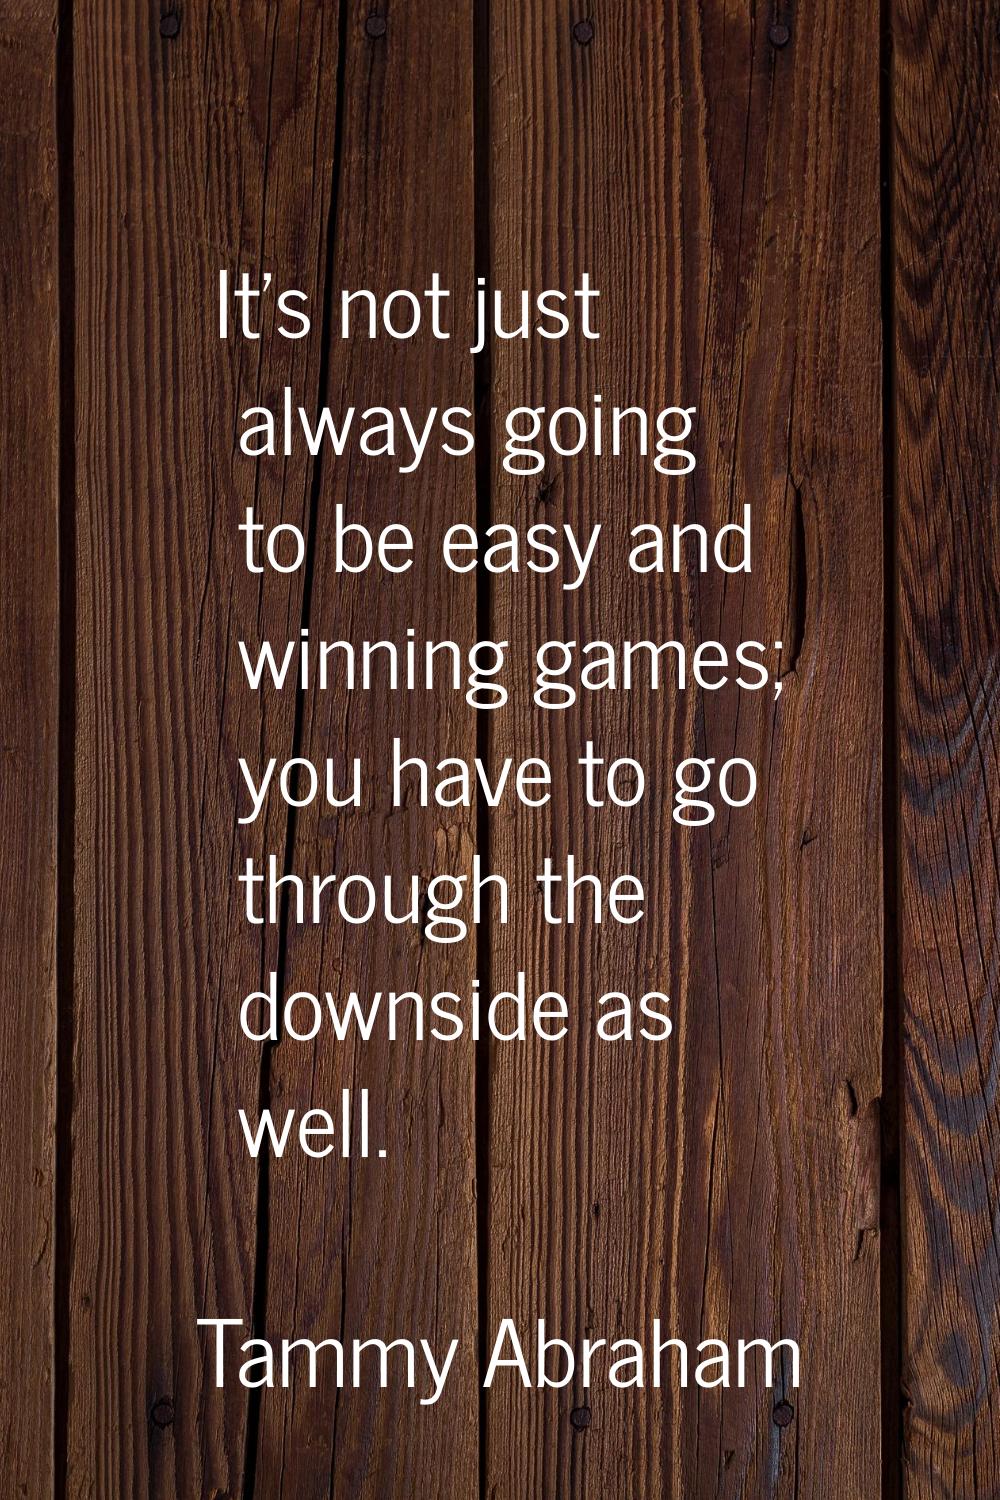 It's not just always going to be easy and winning games; you have to go through the downside as wel